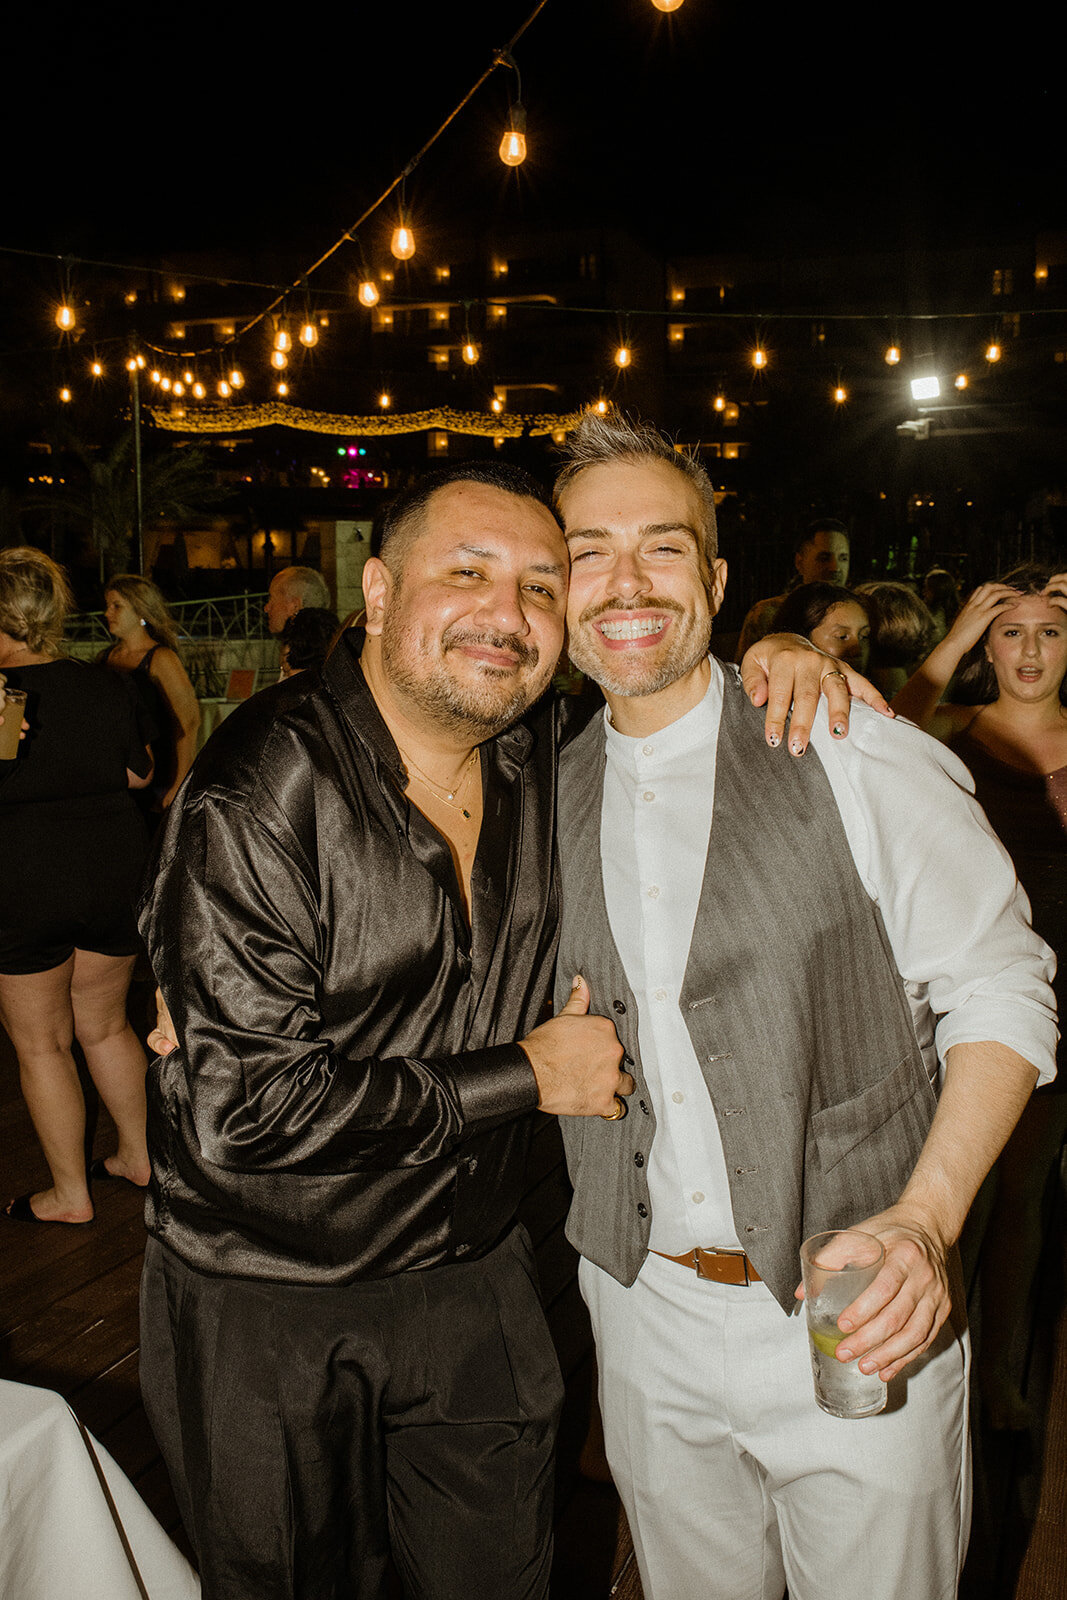 g-mexico-cancun-dreams-natura-resort-queer-lgbtq-wedding-details-party-dance-party-15